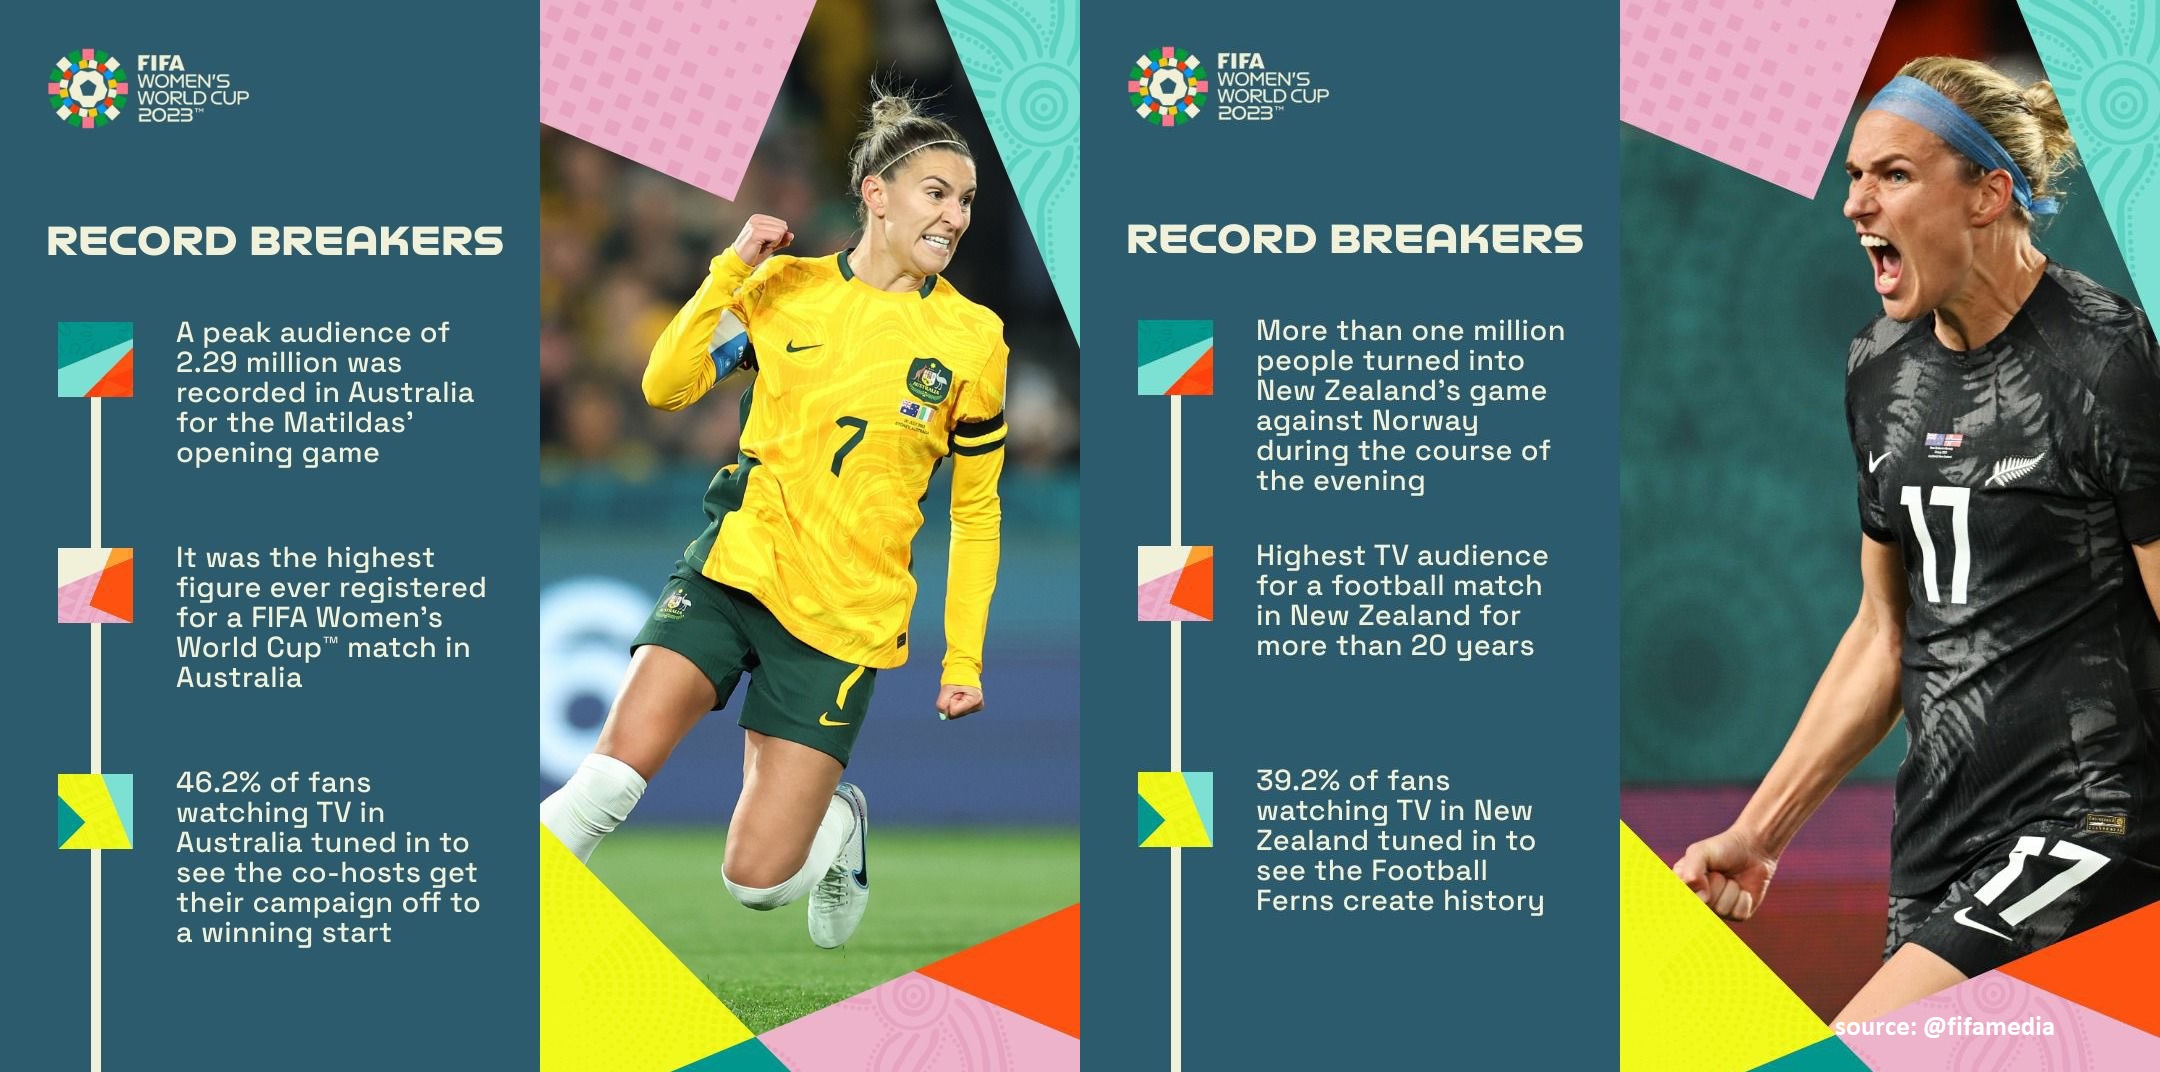 Viewing records smashed in Aus and NZ. Source: @fifamedia